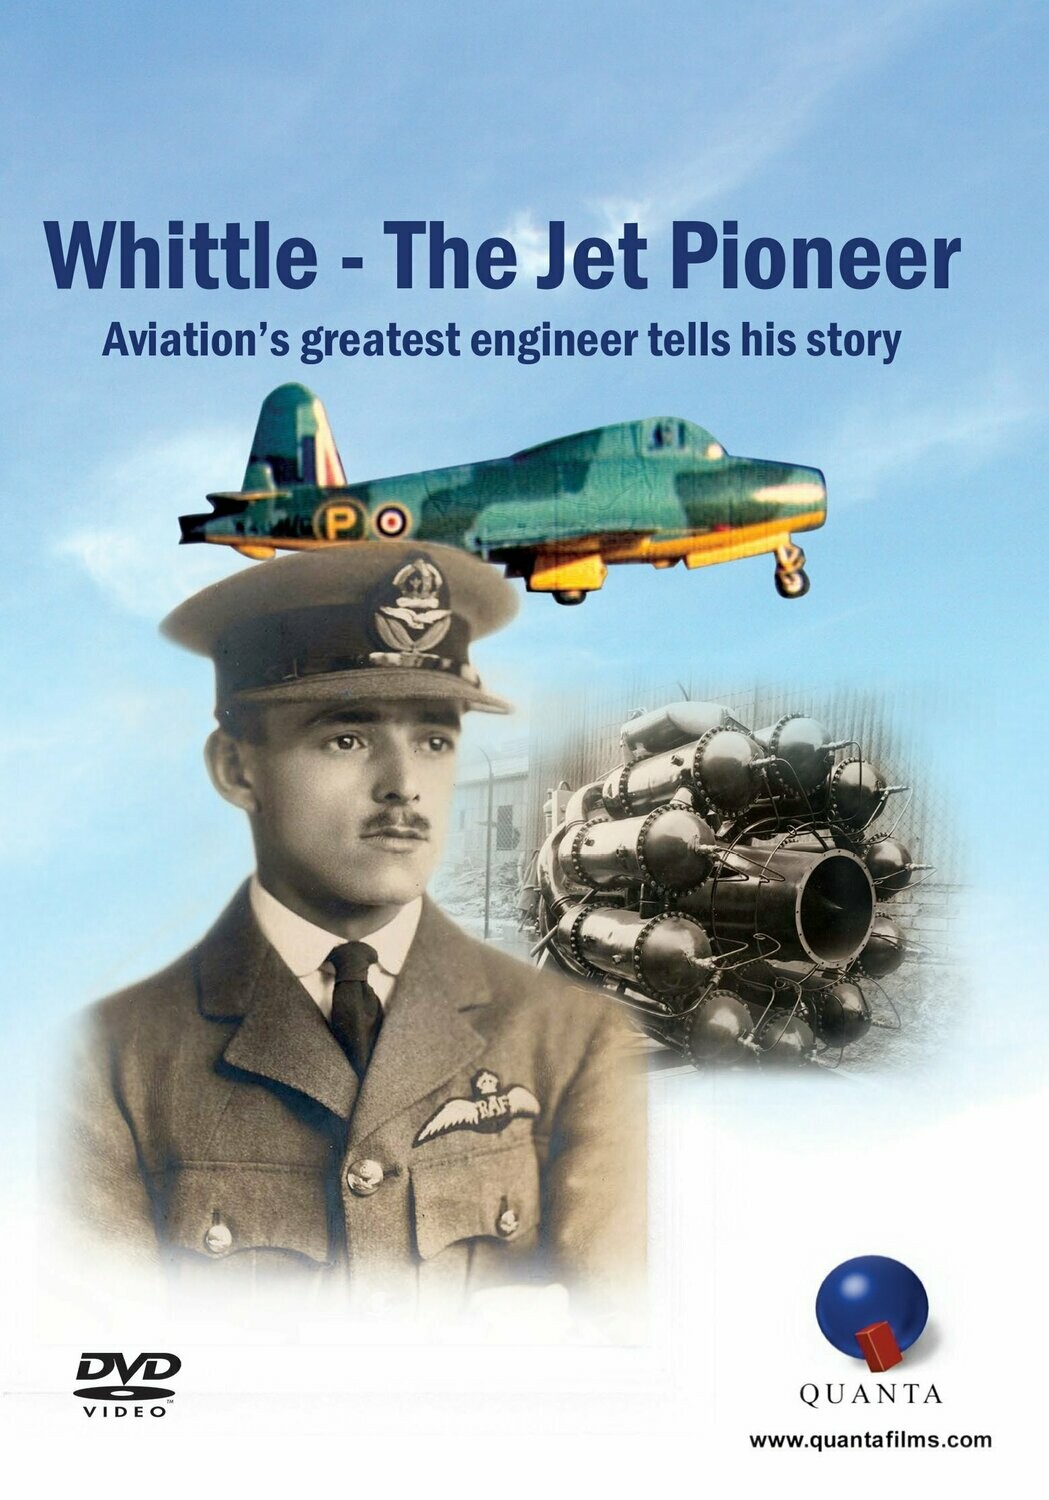 WHITTLE - THE JET PIONEER (DVD)